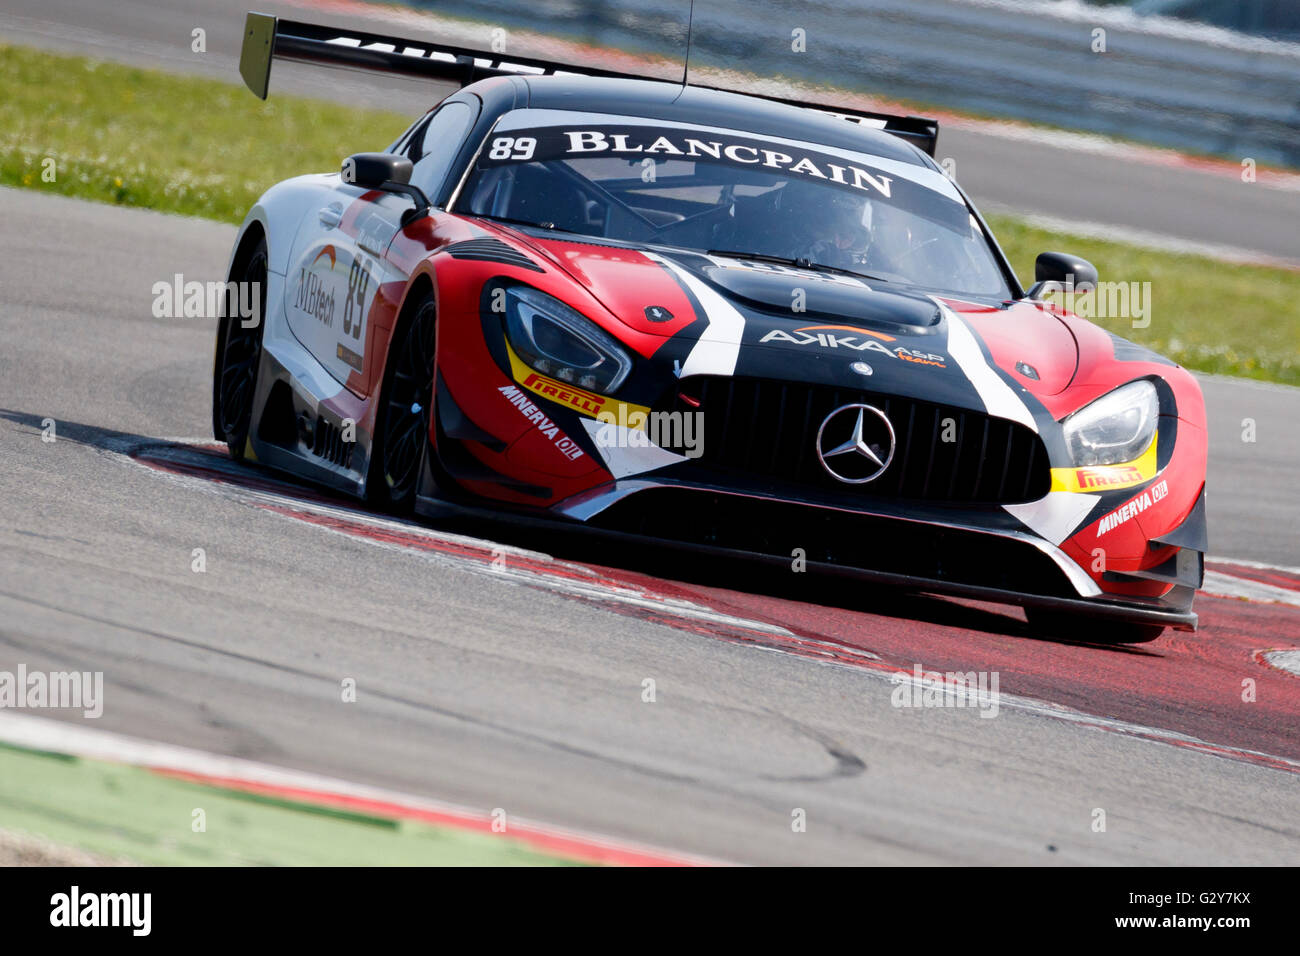 Misano Adriatico, Italy - April 10, 2016: Mercedes -AMG GT3 of AKKA ASP Team, driven by Maurice RicciI, the Blancpain GT Sports Club Main Race in Misano World Circuit. Stock Photo